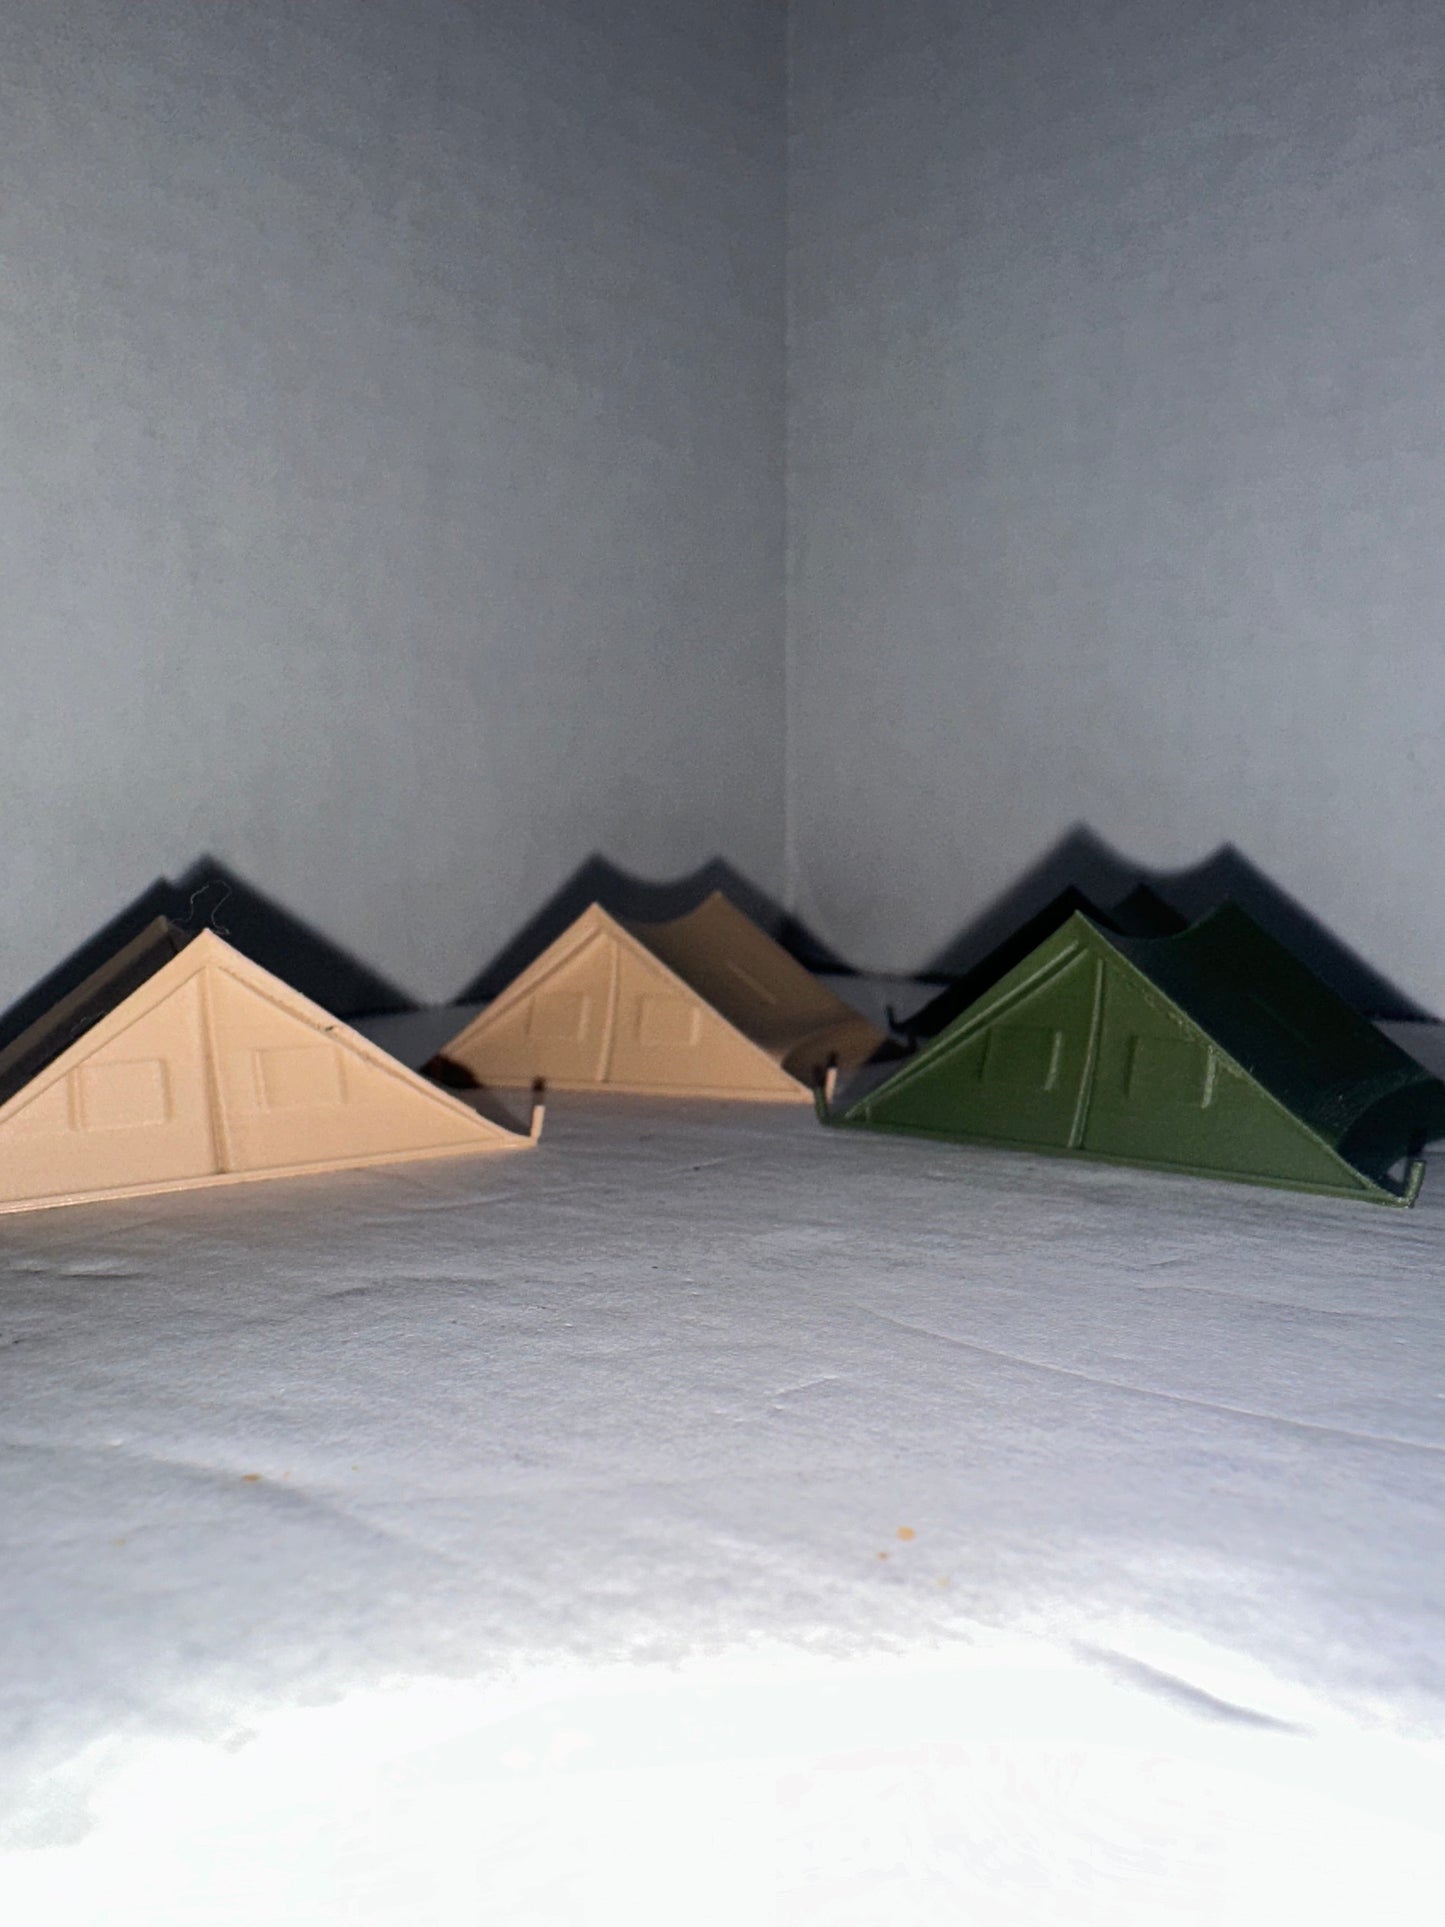 HO Scale Camping Tents 4-Pack Army / Military Colors 1:87 Camp Scenery Diorama